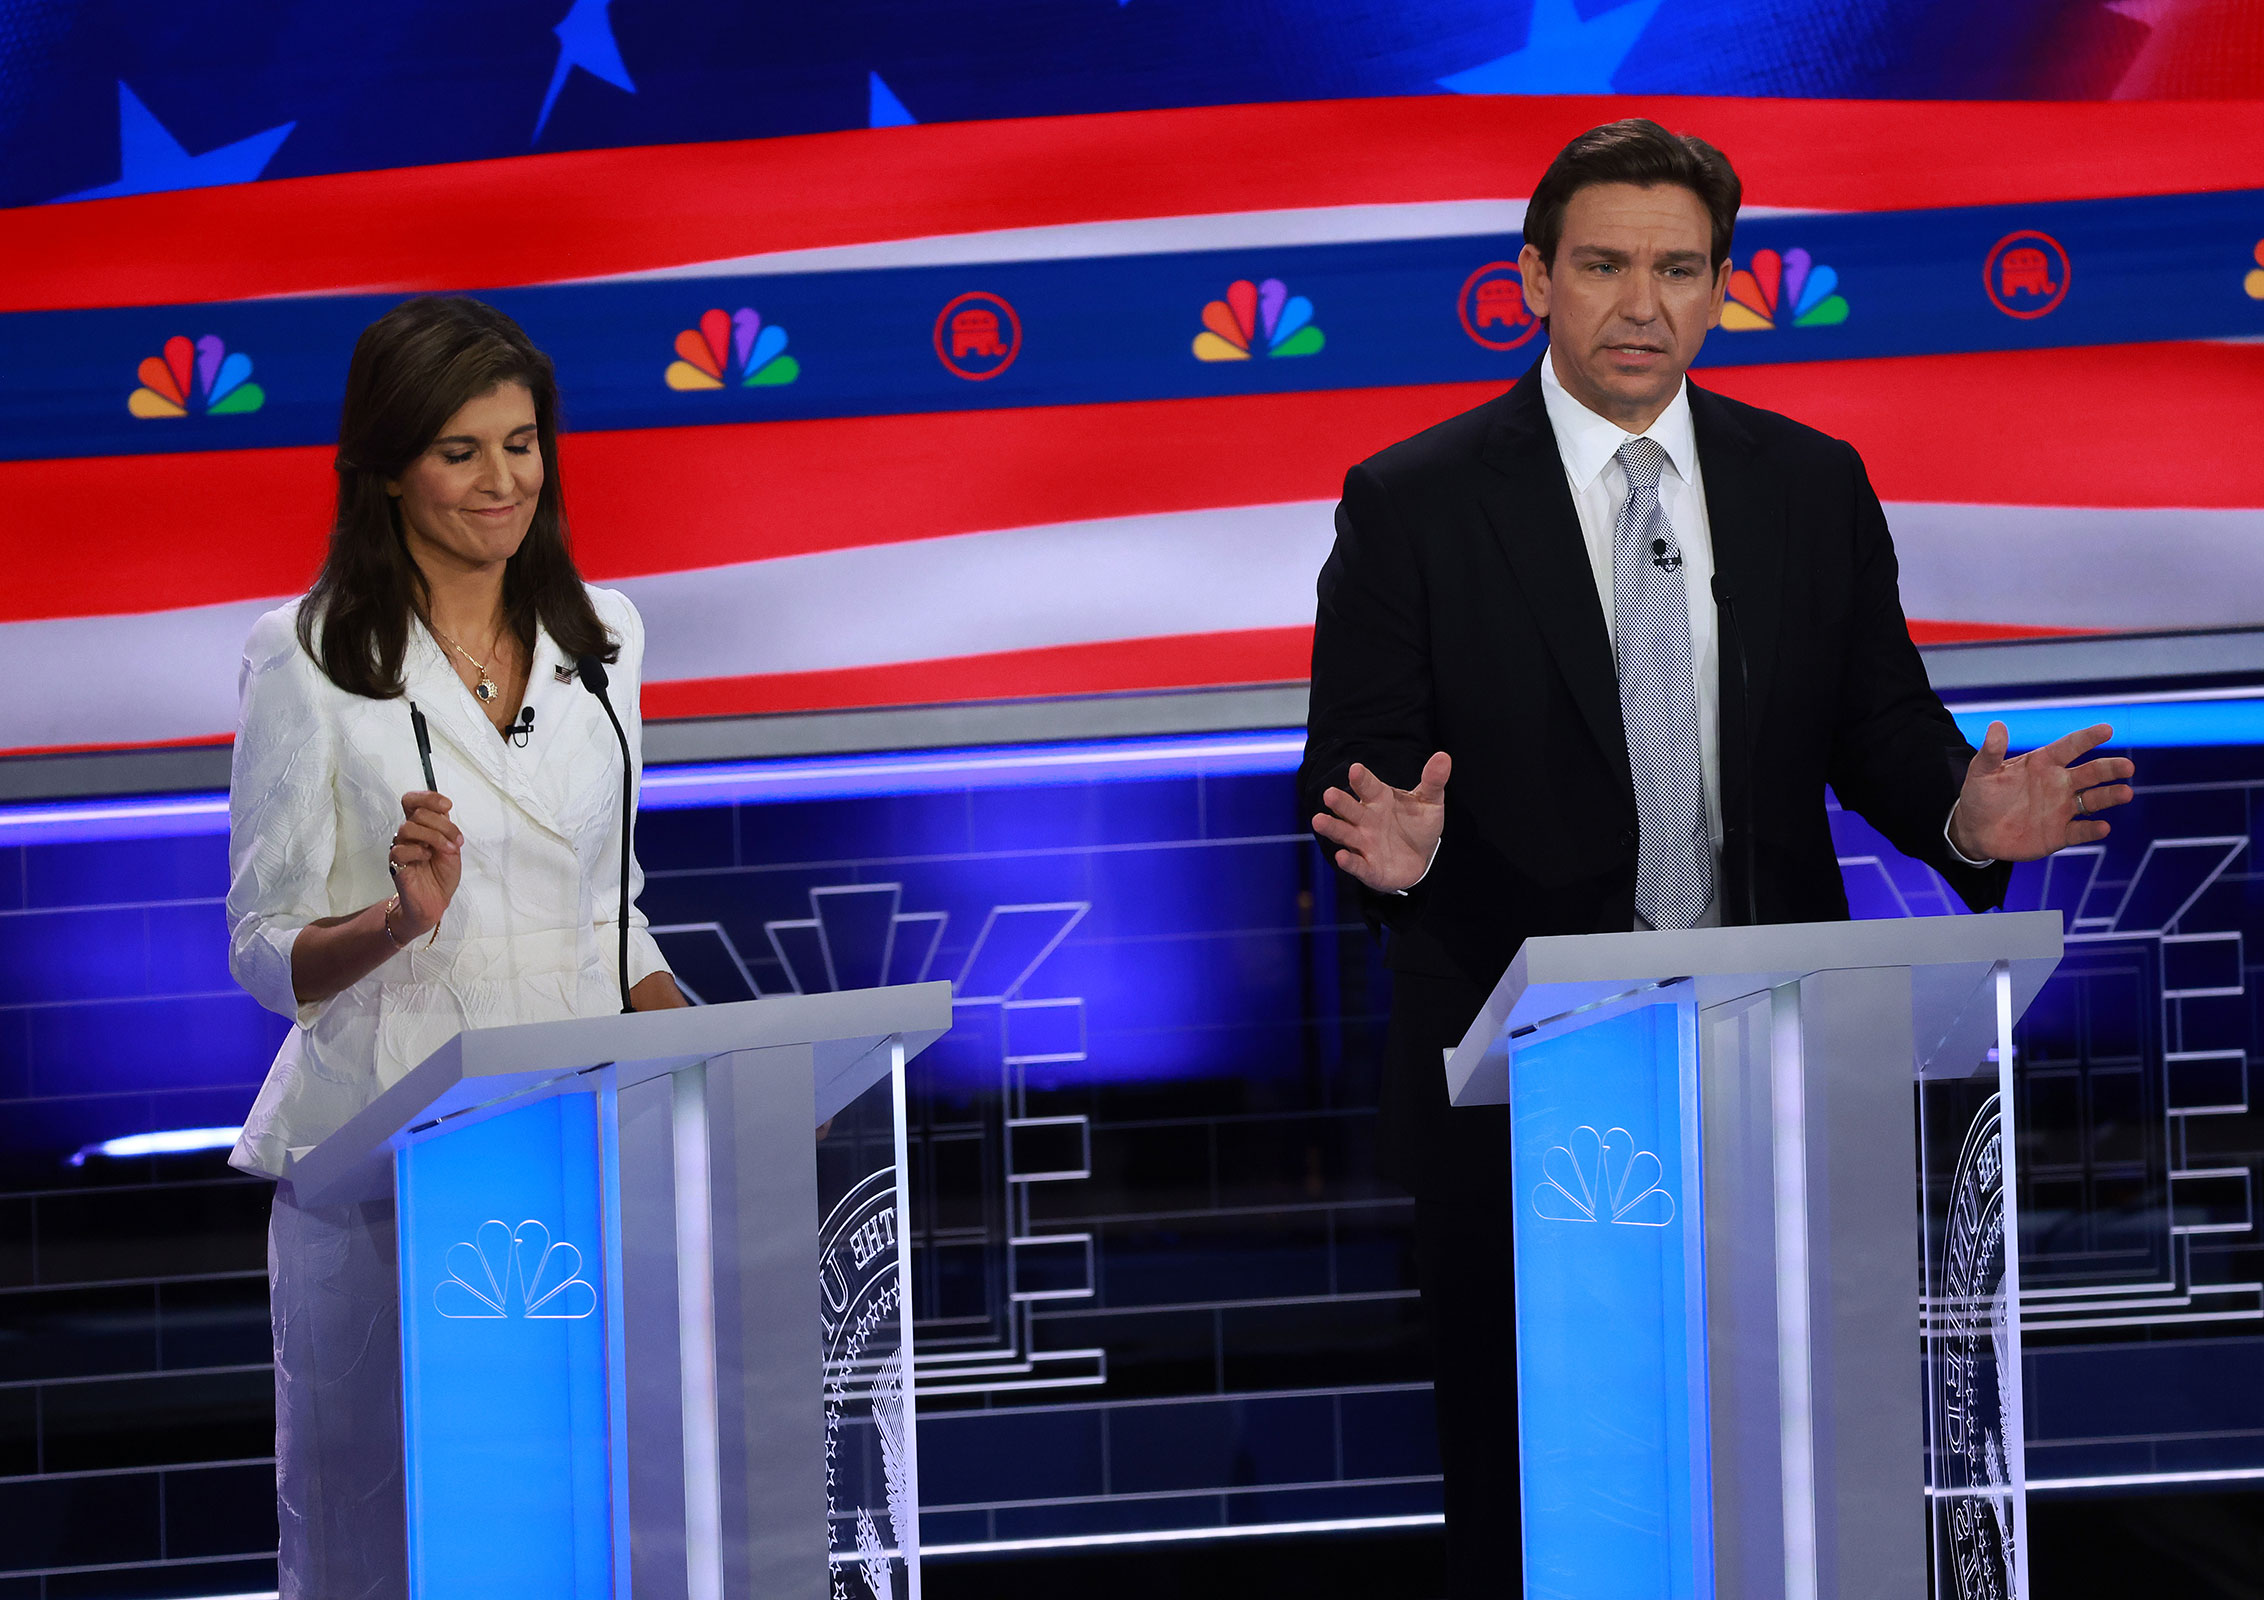 Florida Gov. Ron DeSantis speaks alongside former UN Ambassador Nikki Haley during the NBC News Republican Presidential Primary Debate at the Adrienne Arsht Center for the Performing Arts of Miami-Dade County on November 8 in Miami. 